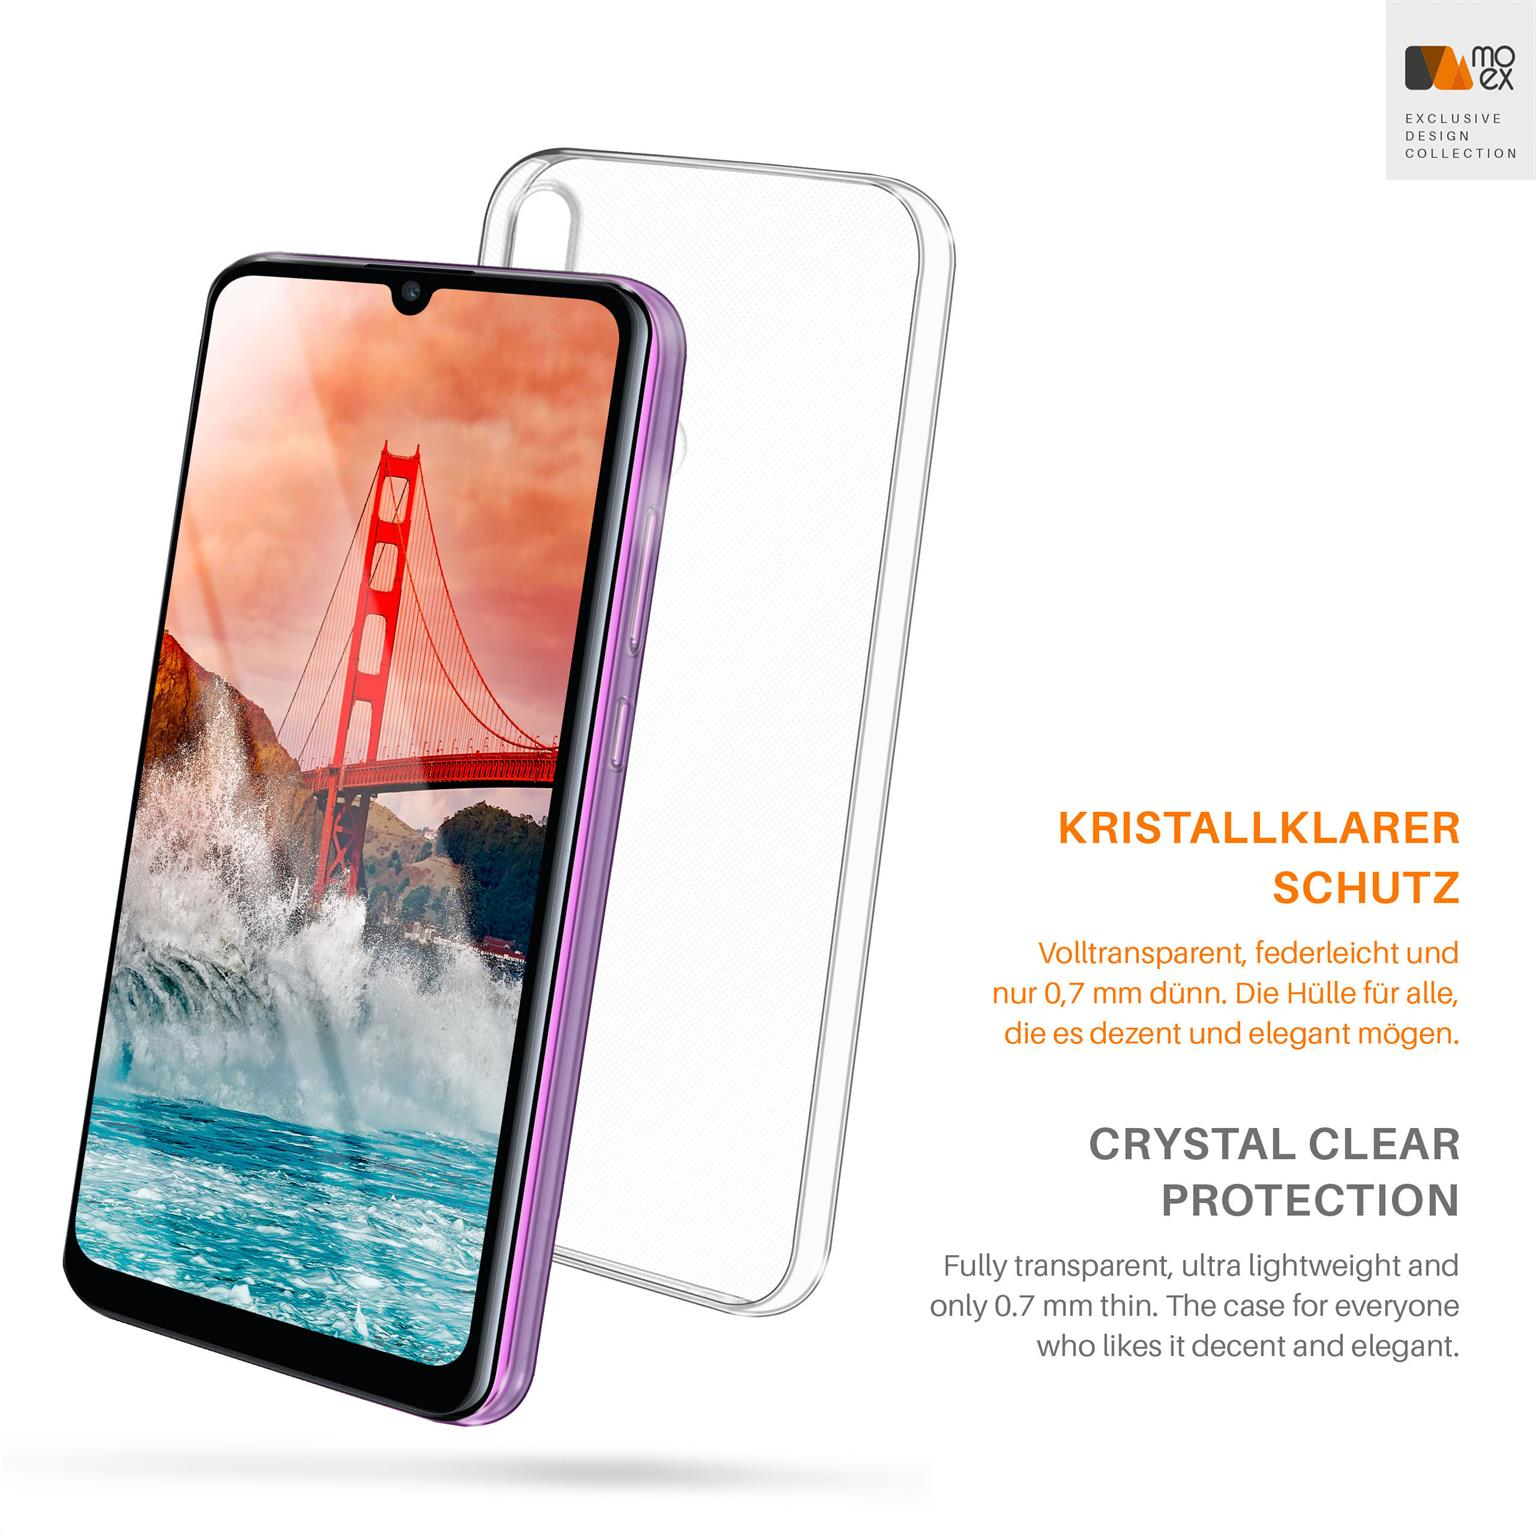 MOEX Y6p, Aero Case, Backcover, Crystal-Clear Huawei,